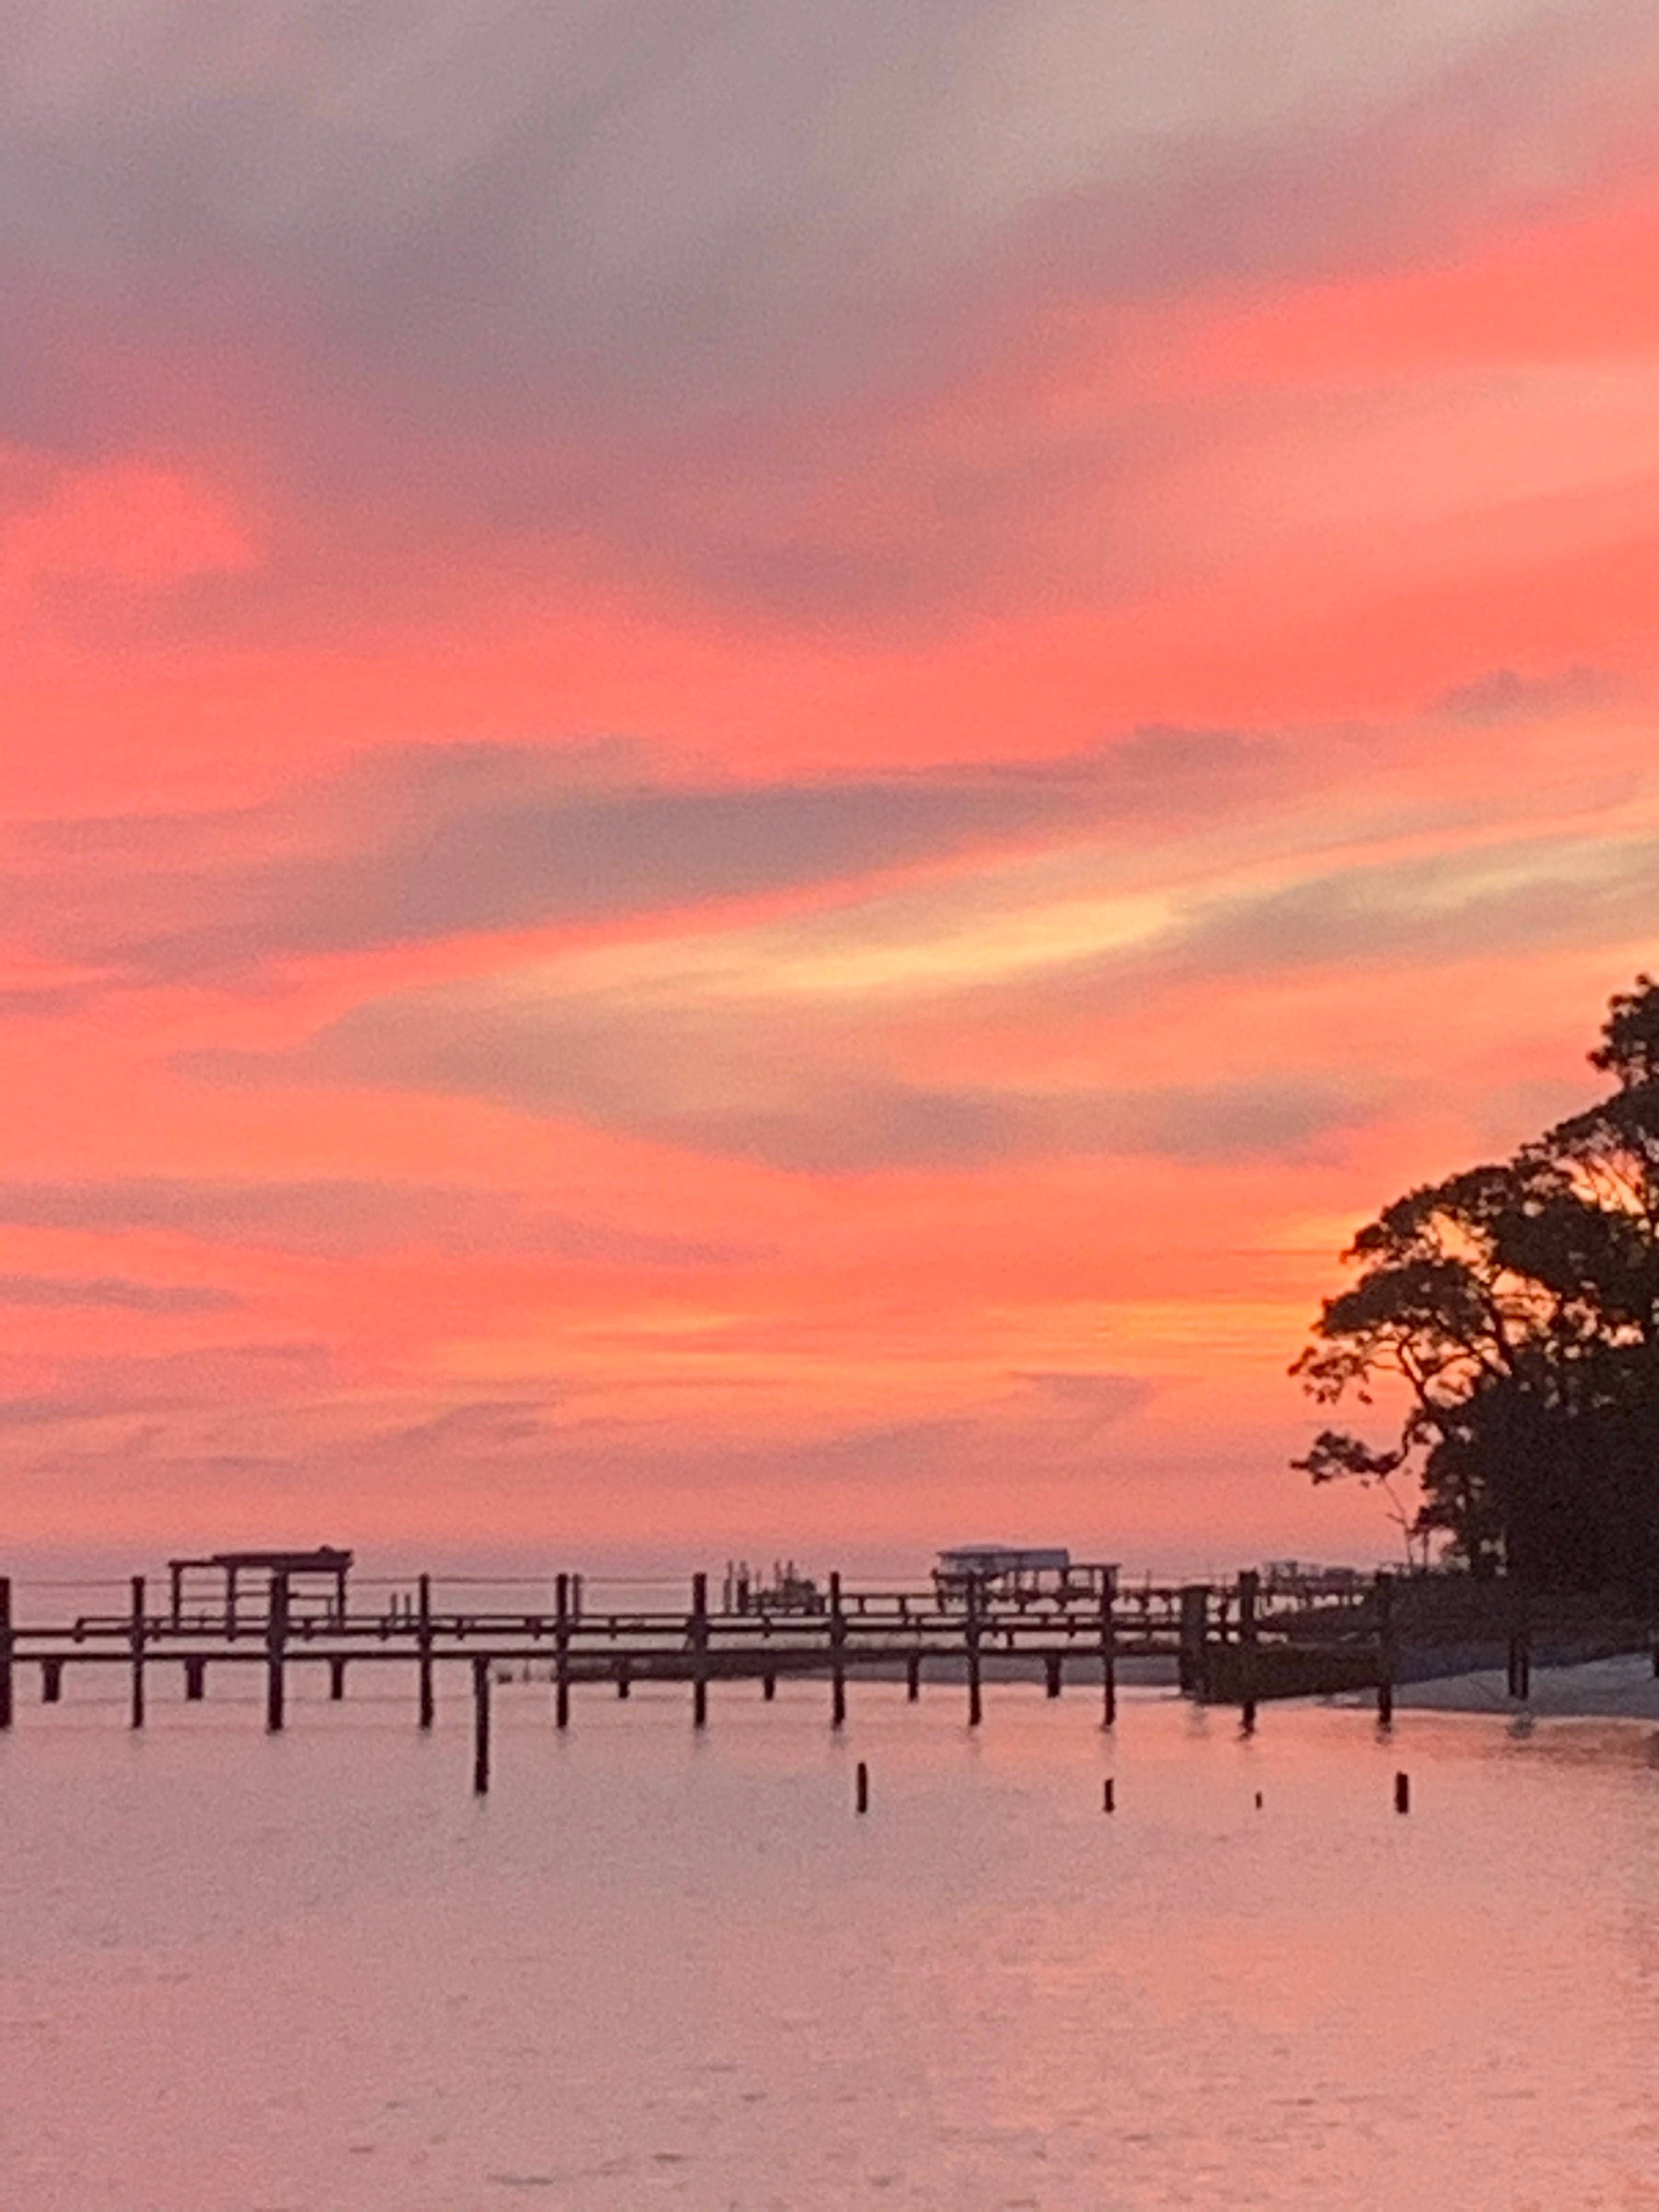 Camper submitted image from Boondocks at Carrabelle, Fl - 3